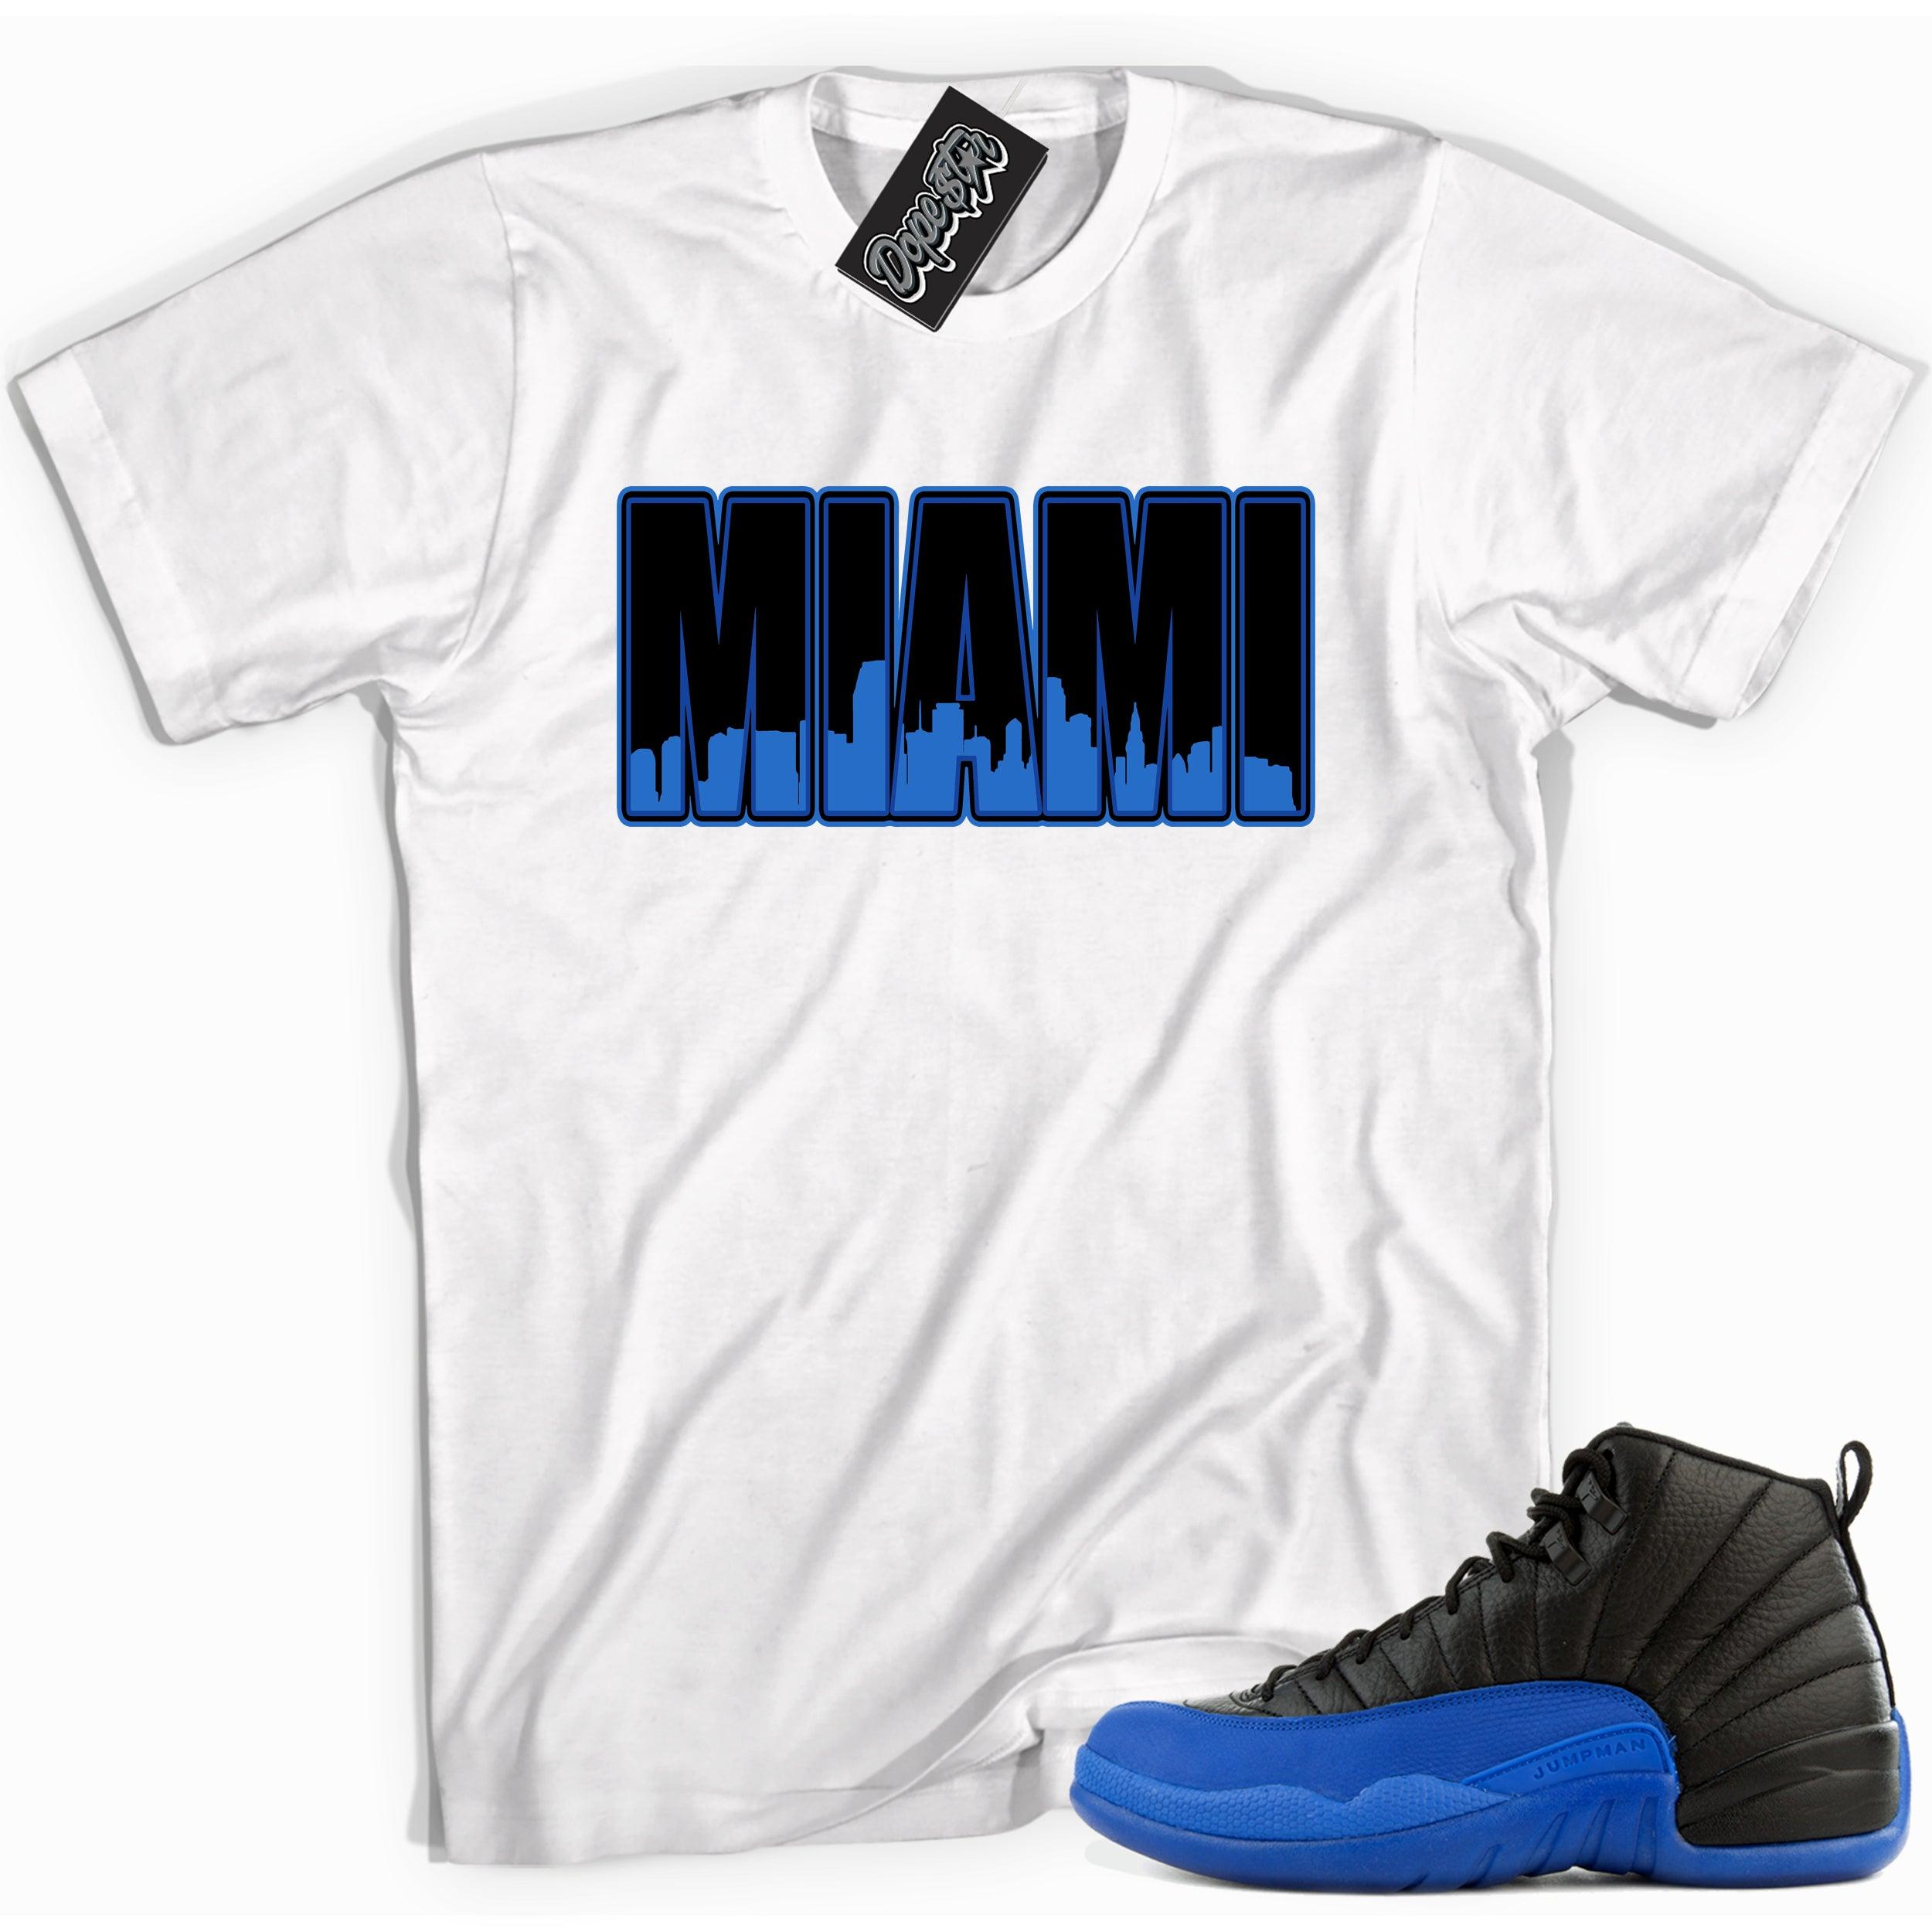 Cool white graphic tee with 'miami' print, that perfectly matches Air Jordan 12 Retro Black Game Royal sneakers.